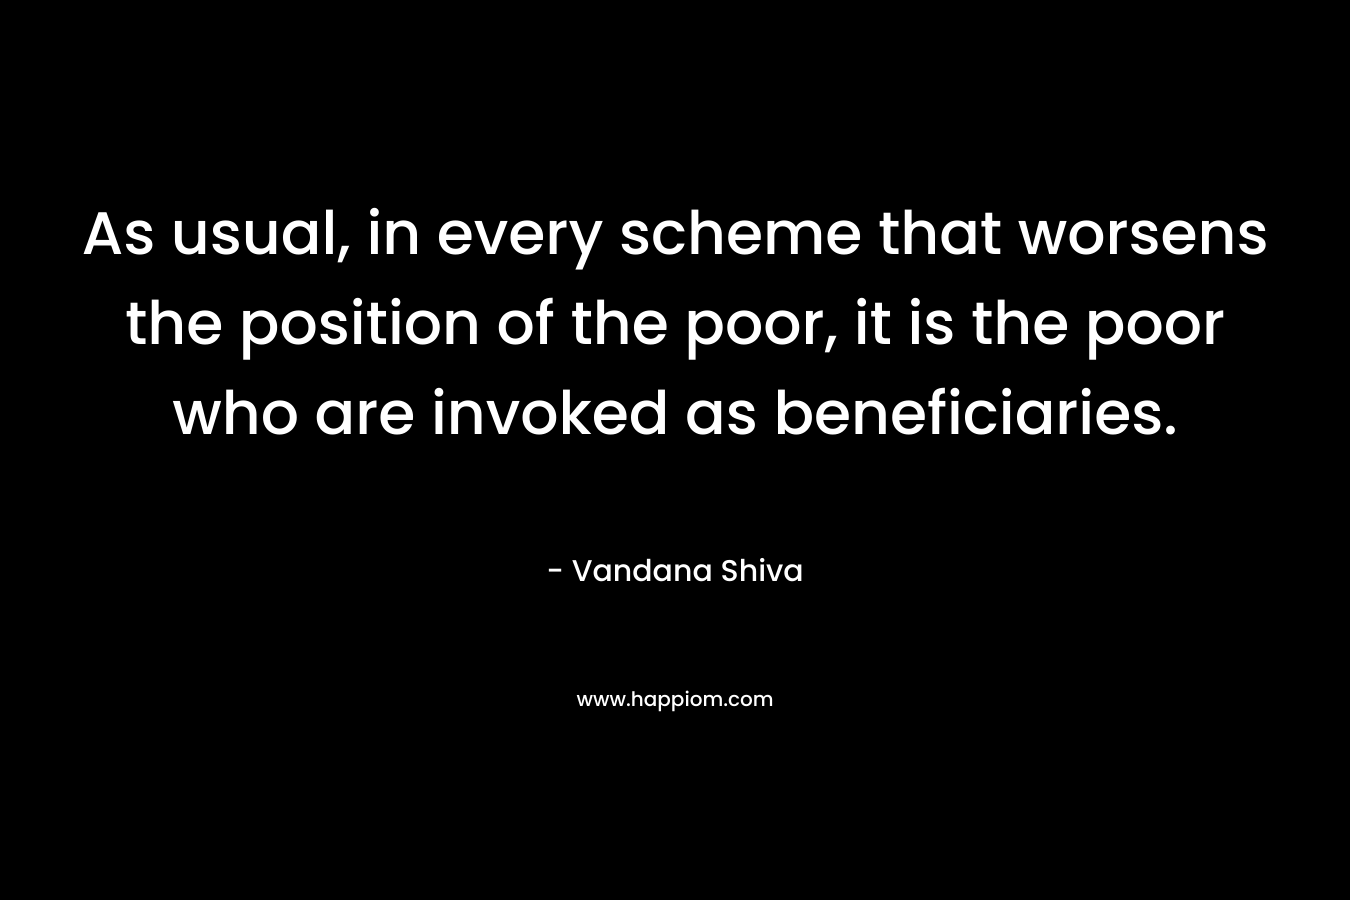 As usual, in every scheme that worsens the position of the poor, it is the poor who are invoked as beneficiaries.